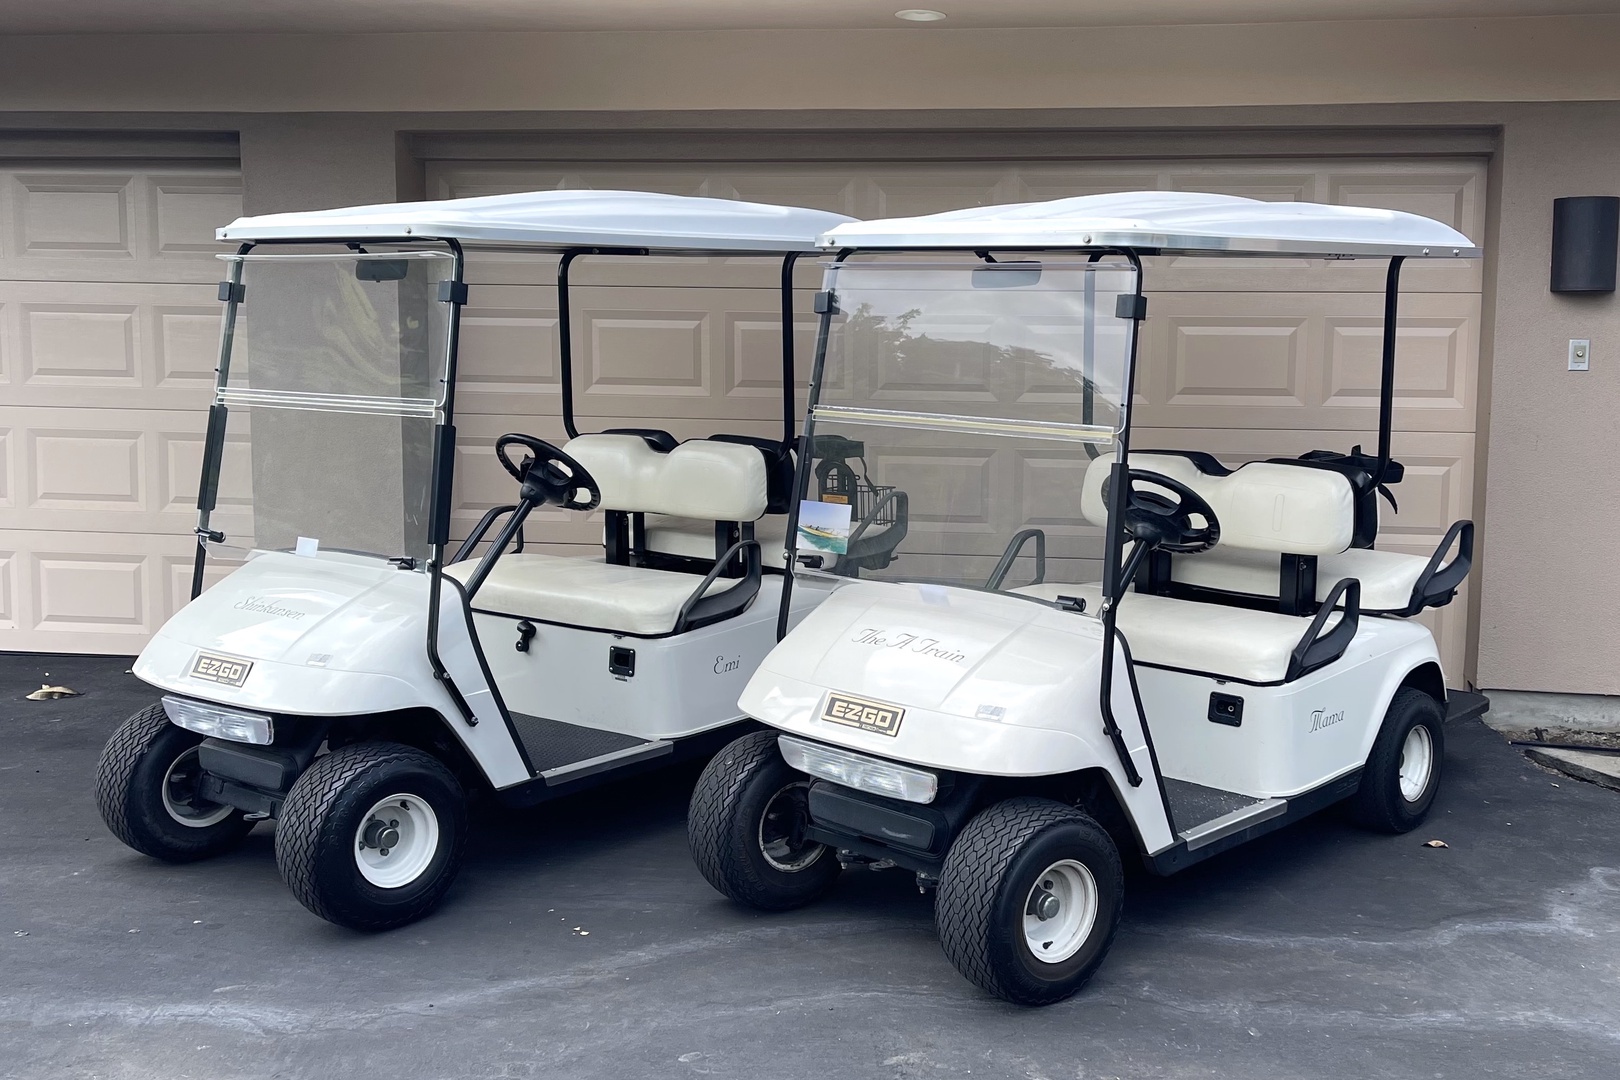 Kailua Kona Vacation Rentals, 2BD Fairways Villa (120C) at Four Seasons Resort at Hualalai - Two 4-seater golf carts are included for cruising the dazzling resort grounds.